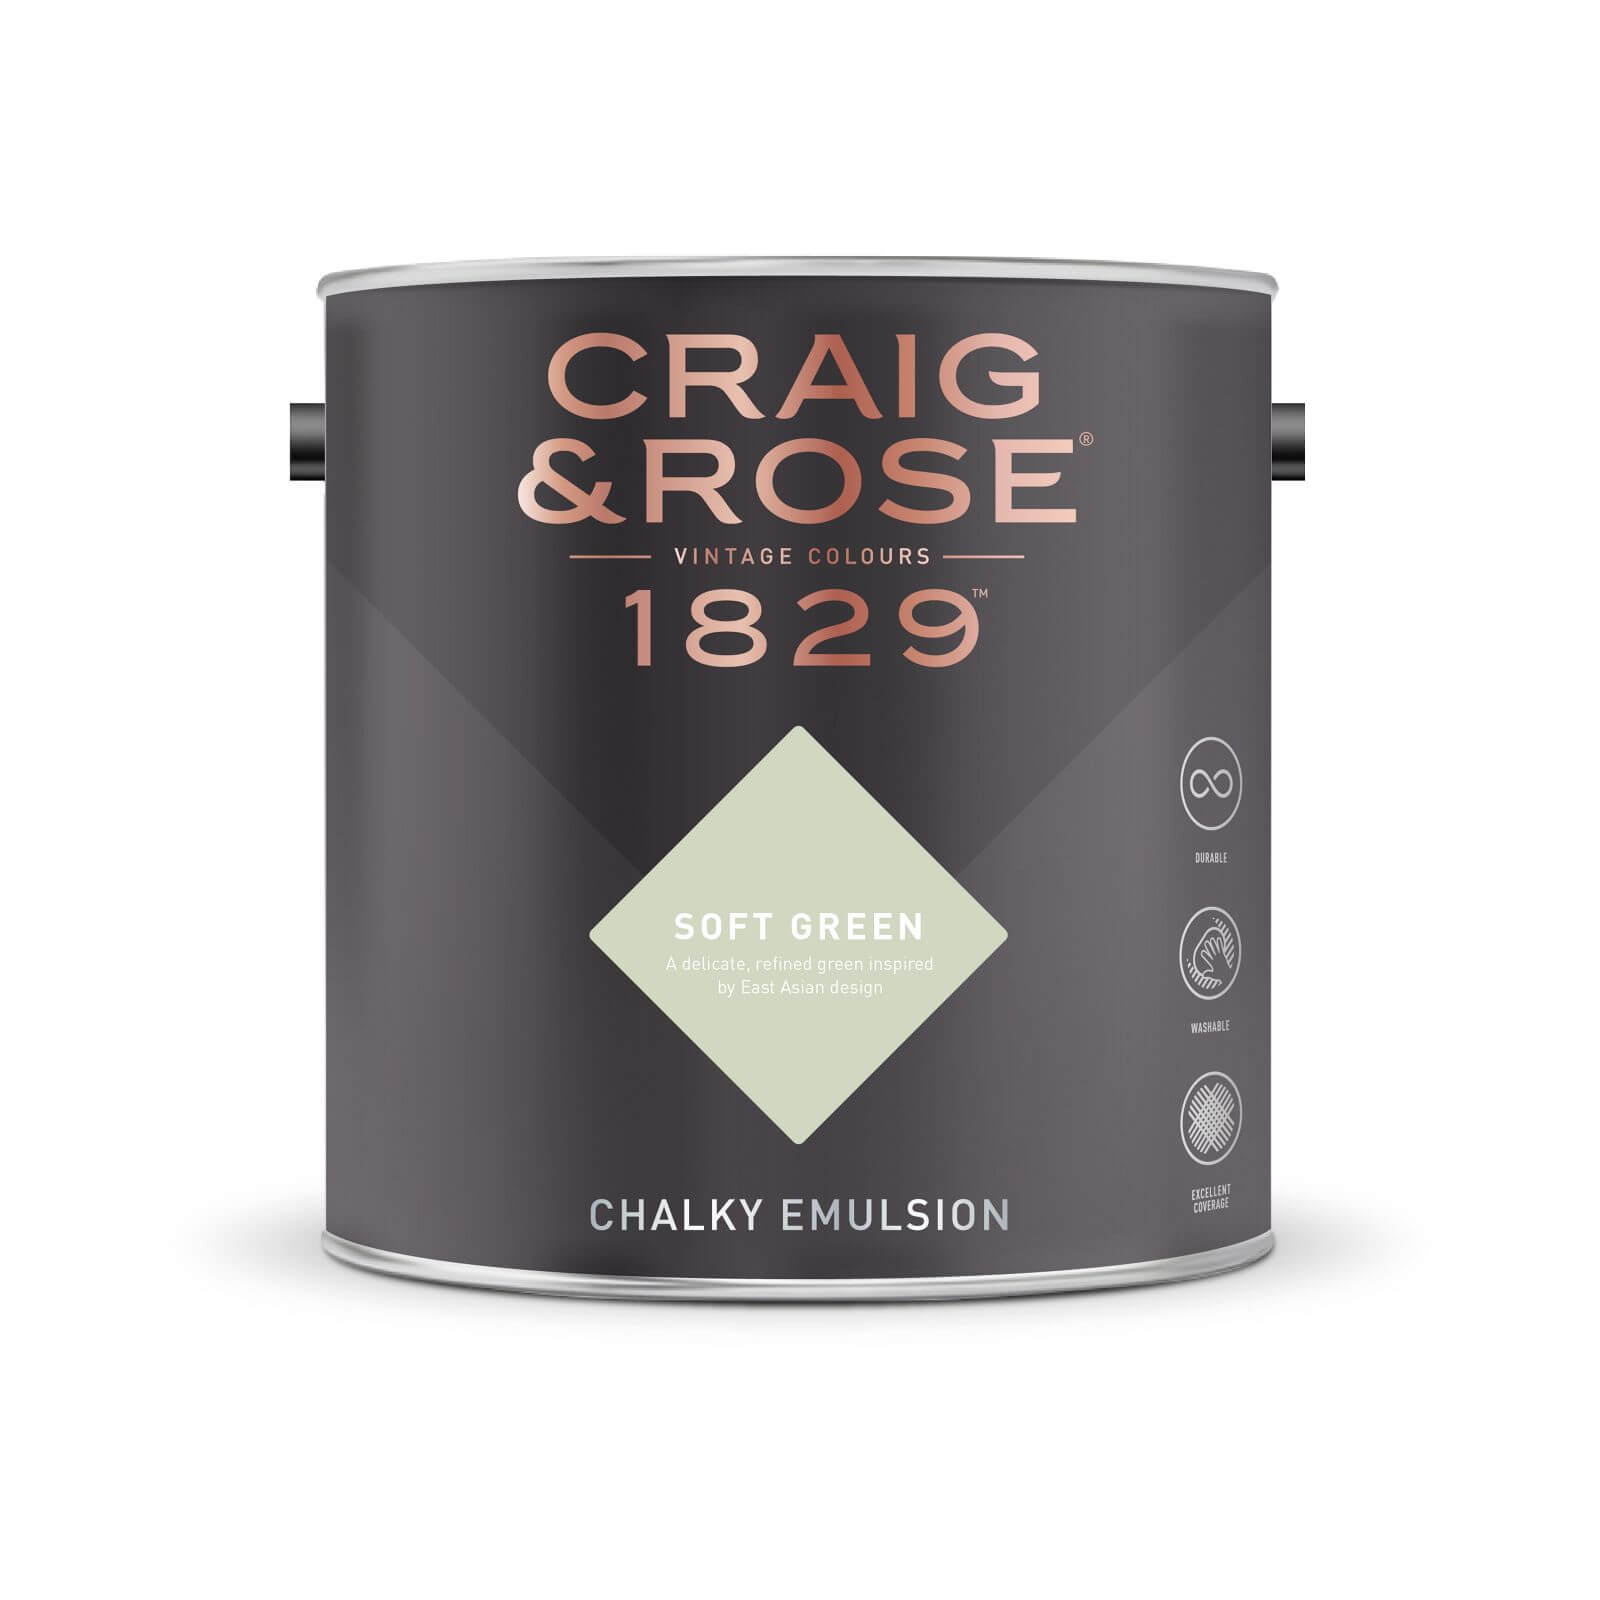 Craig & Rose 1829 Chalky Emulsion Paint Soft Green - 5L